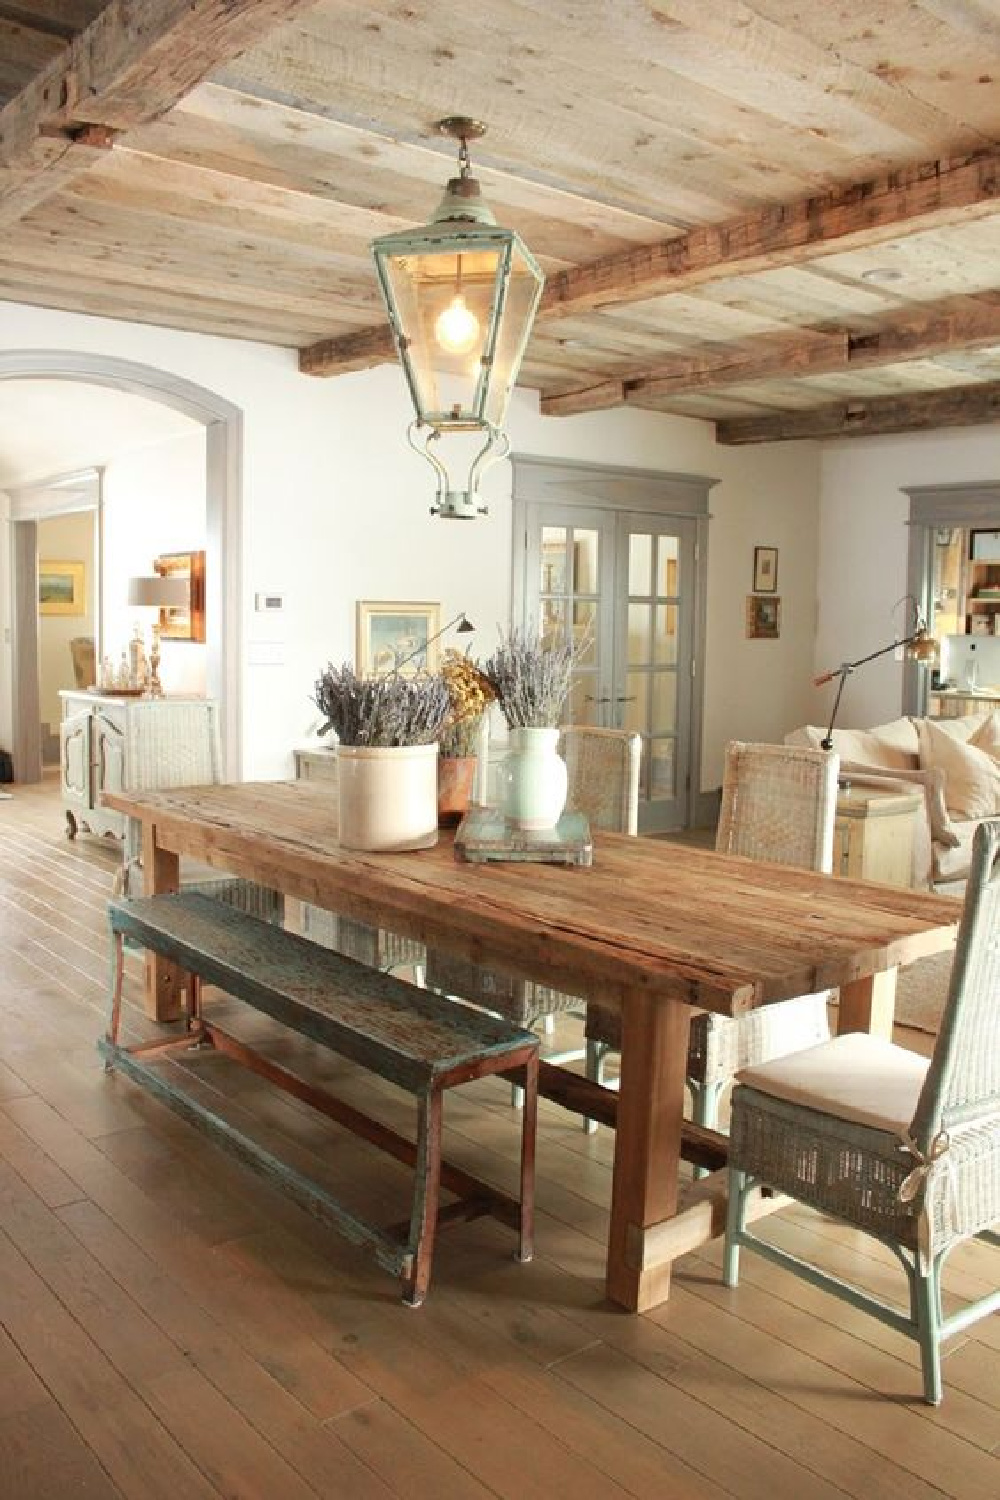 French country dining room with rustic farm table, wicker chairs, and vintage lantern - Decor de Provence.